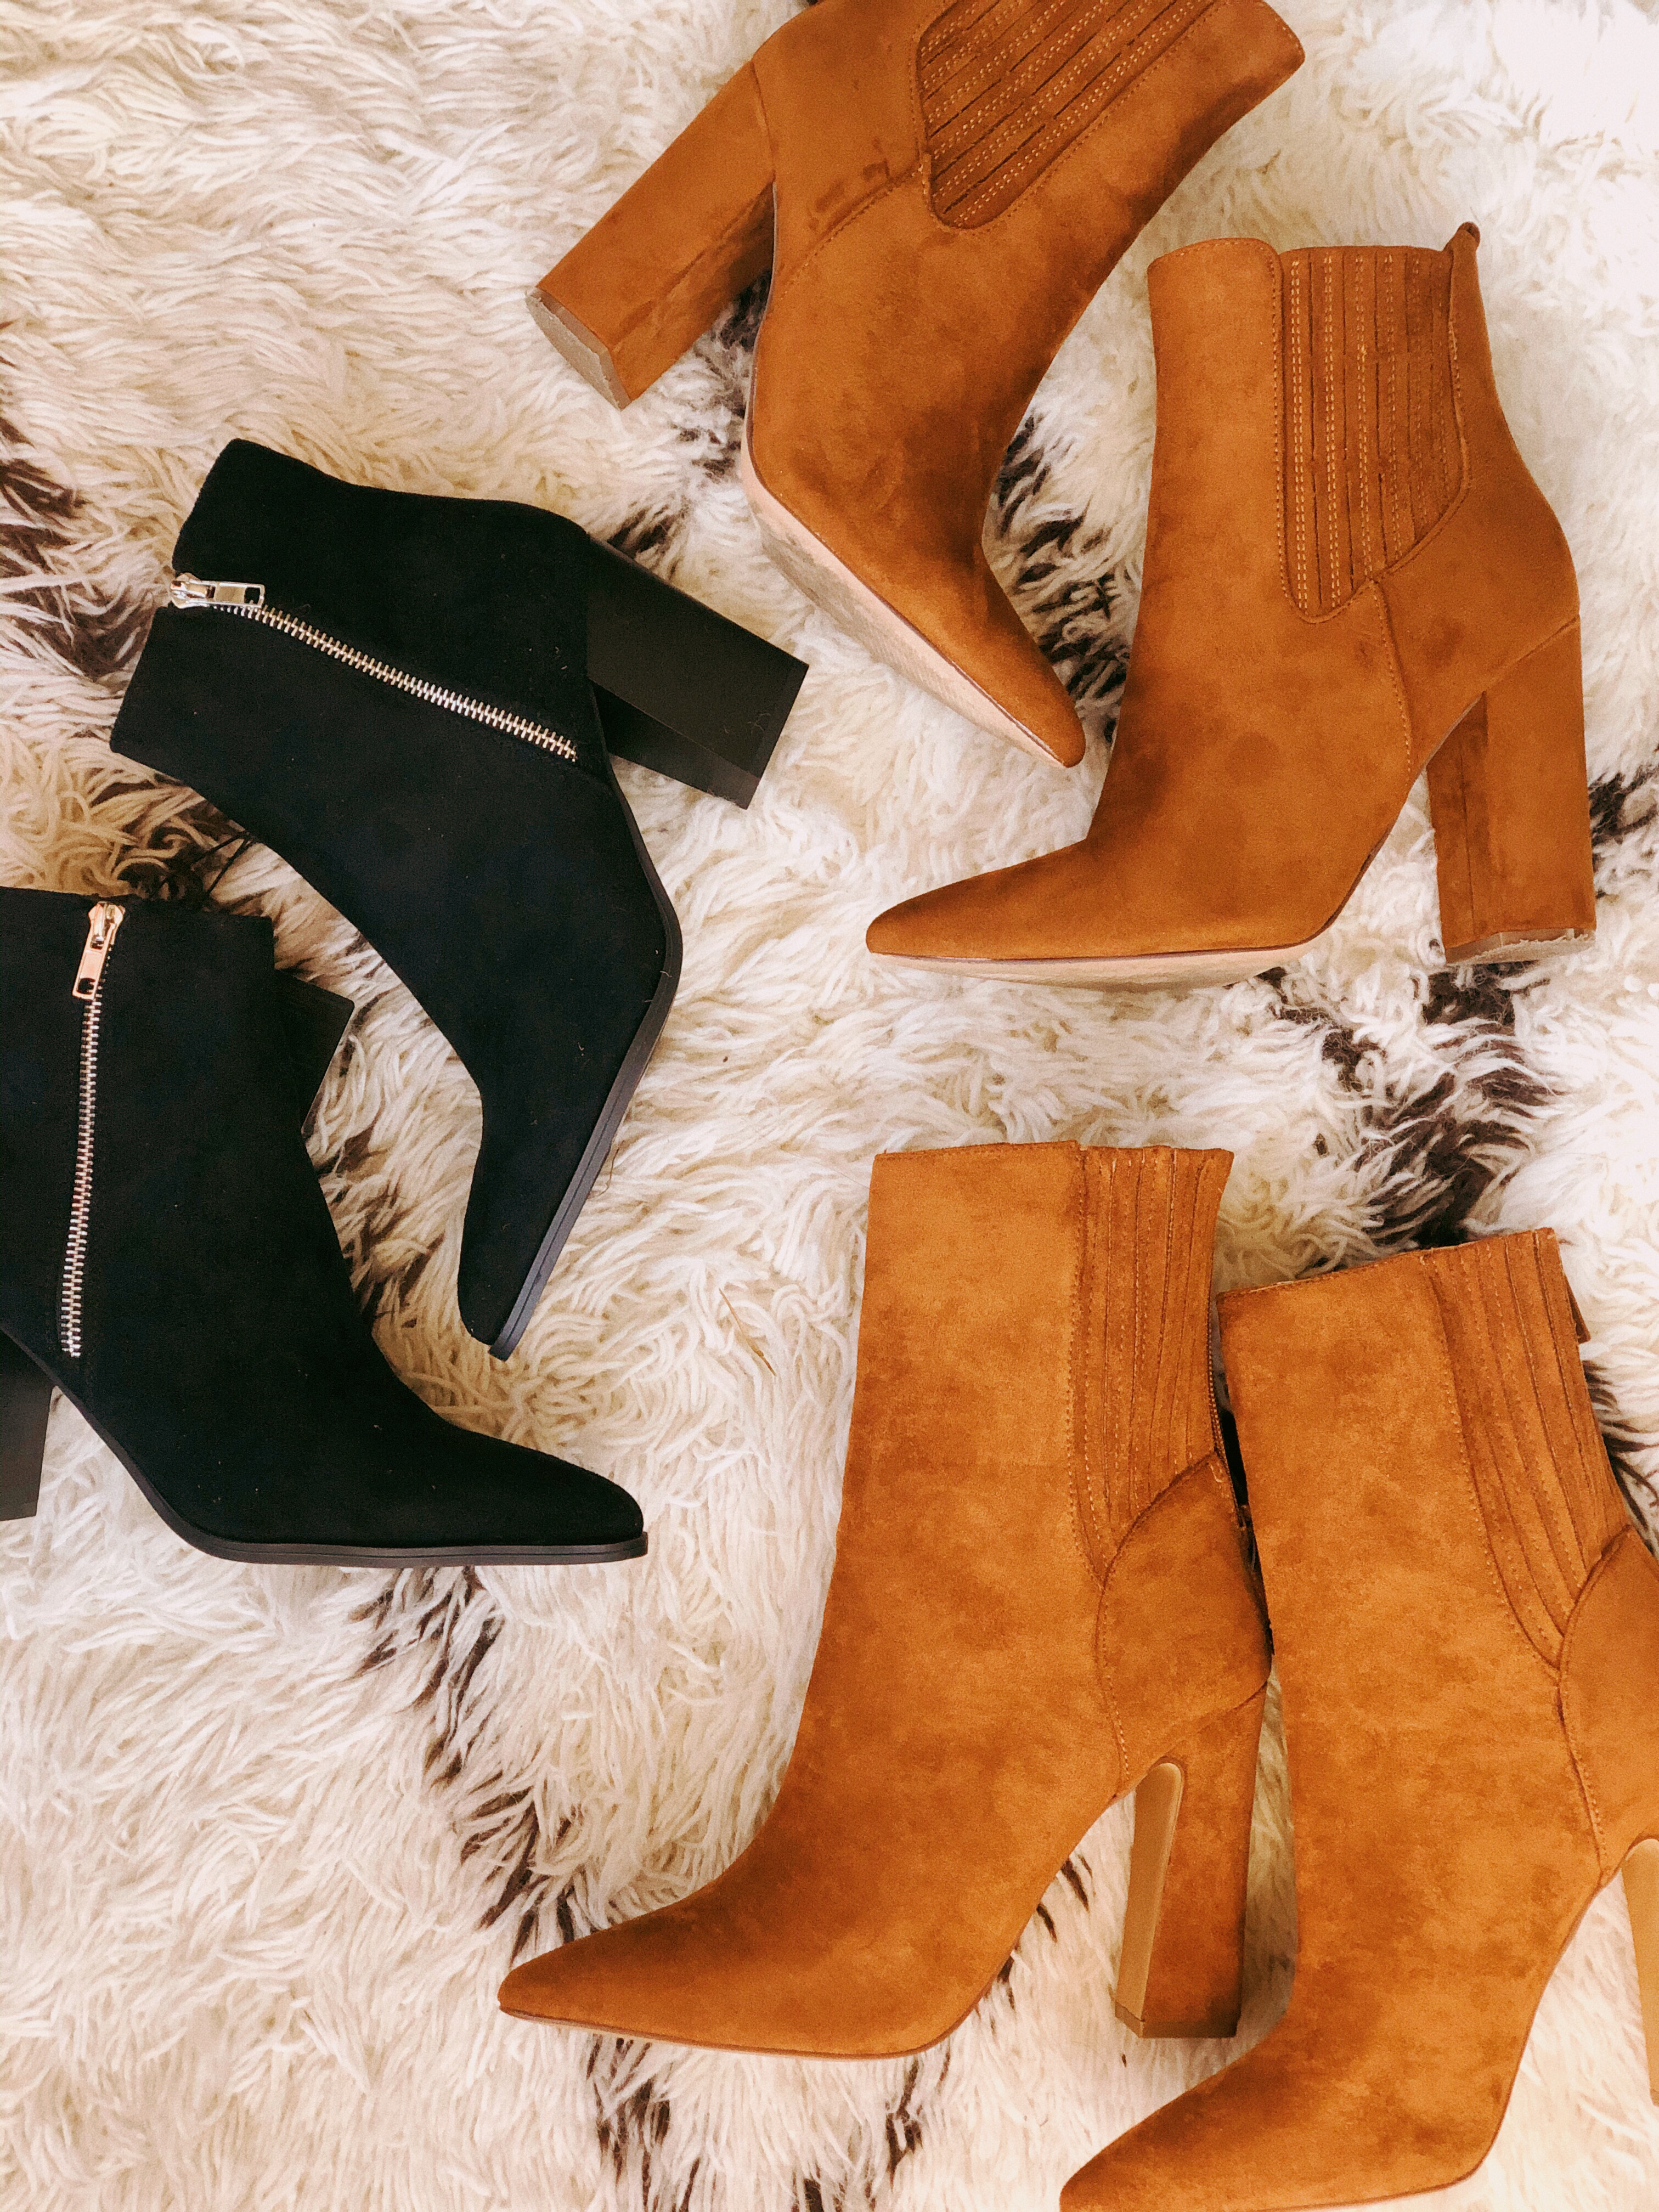 The Secret Place to Find the Best Fall Boots is â Haute Homebody